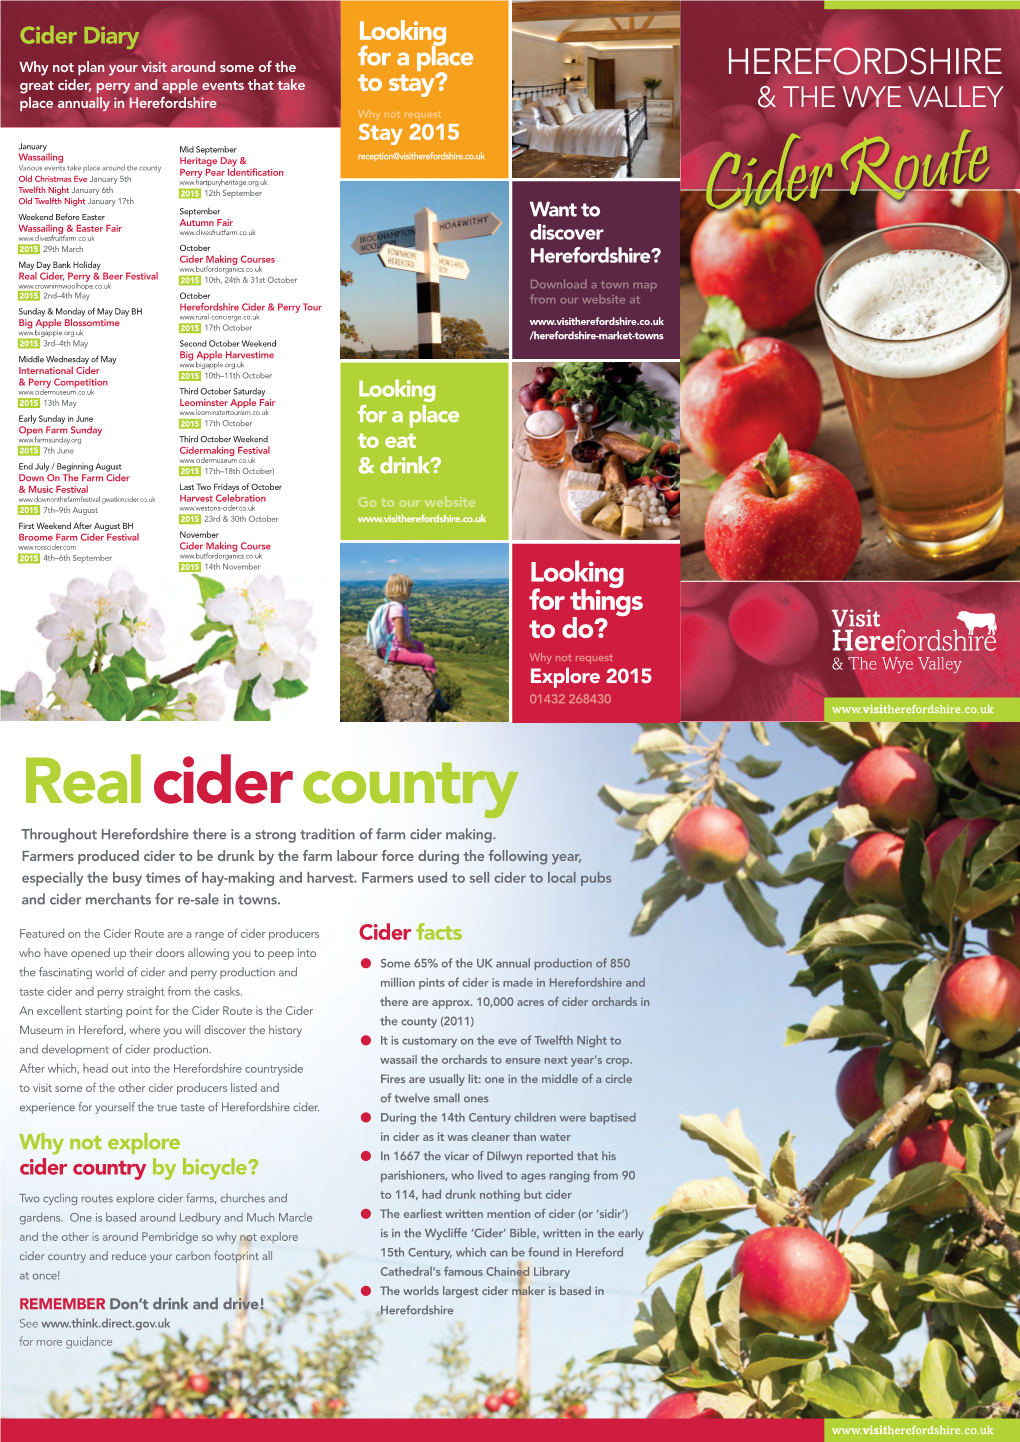 Realcidercountry Throughout Herefordshire There Is a Strong Tradition of Farm Cider Making